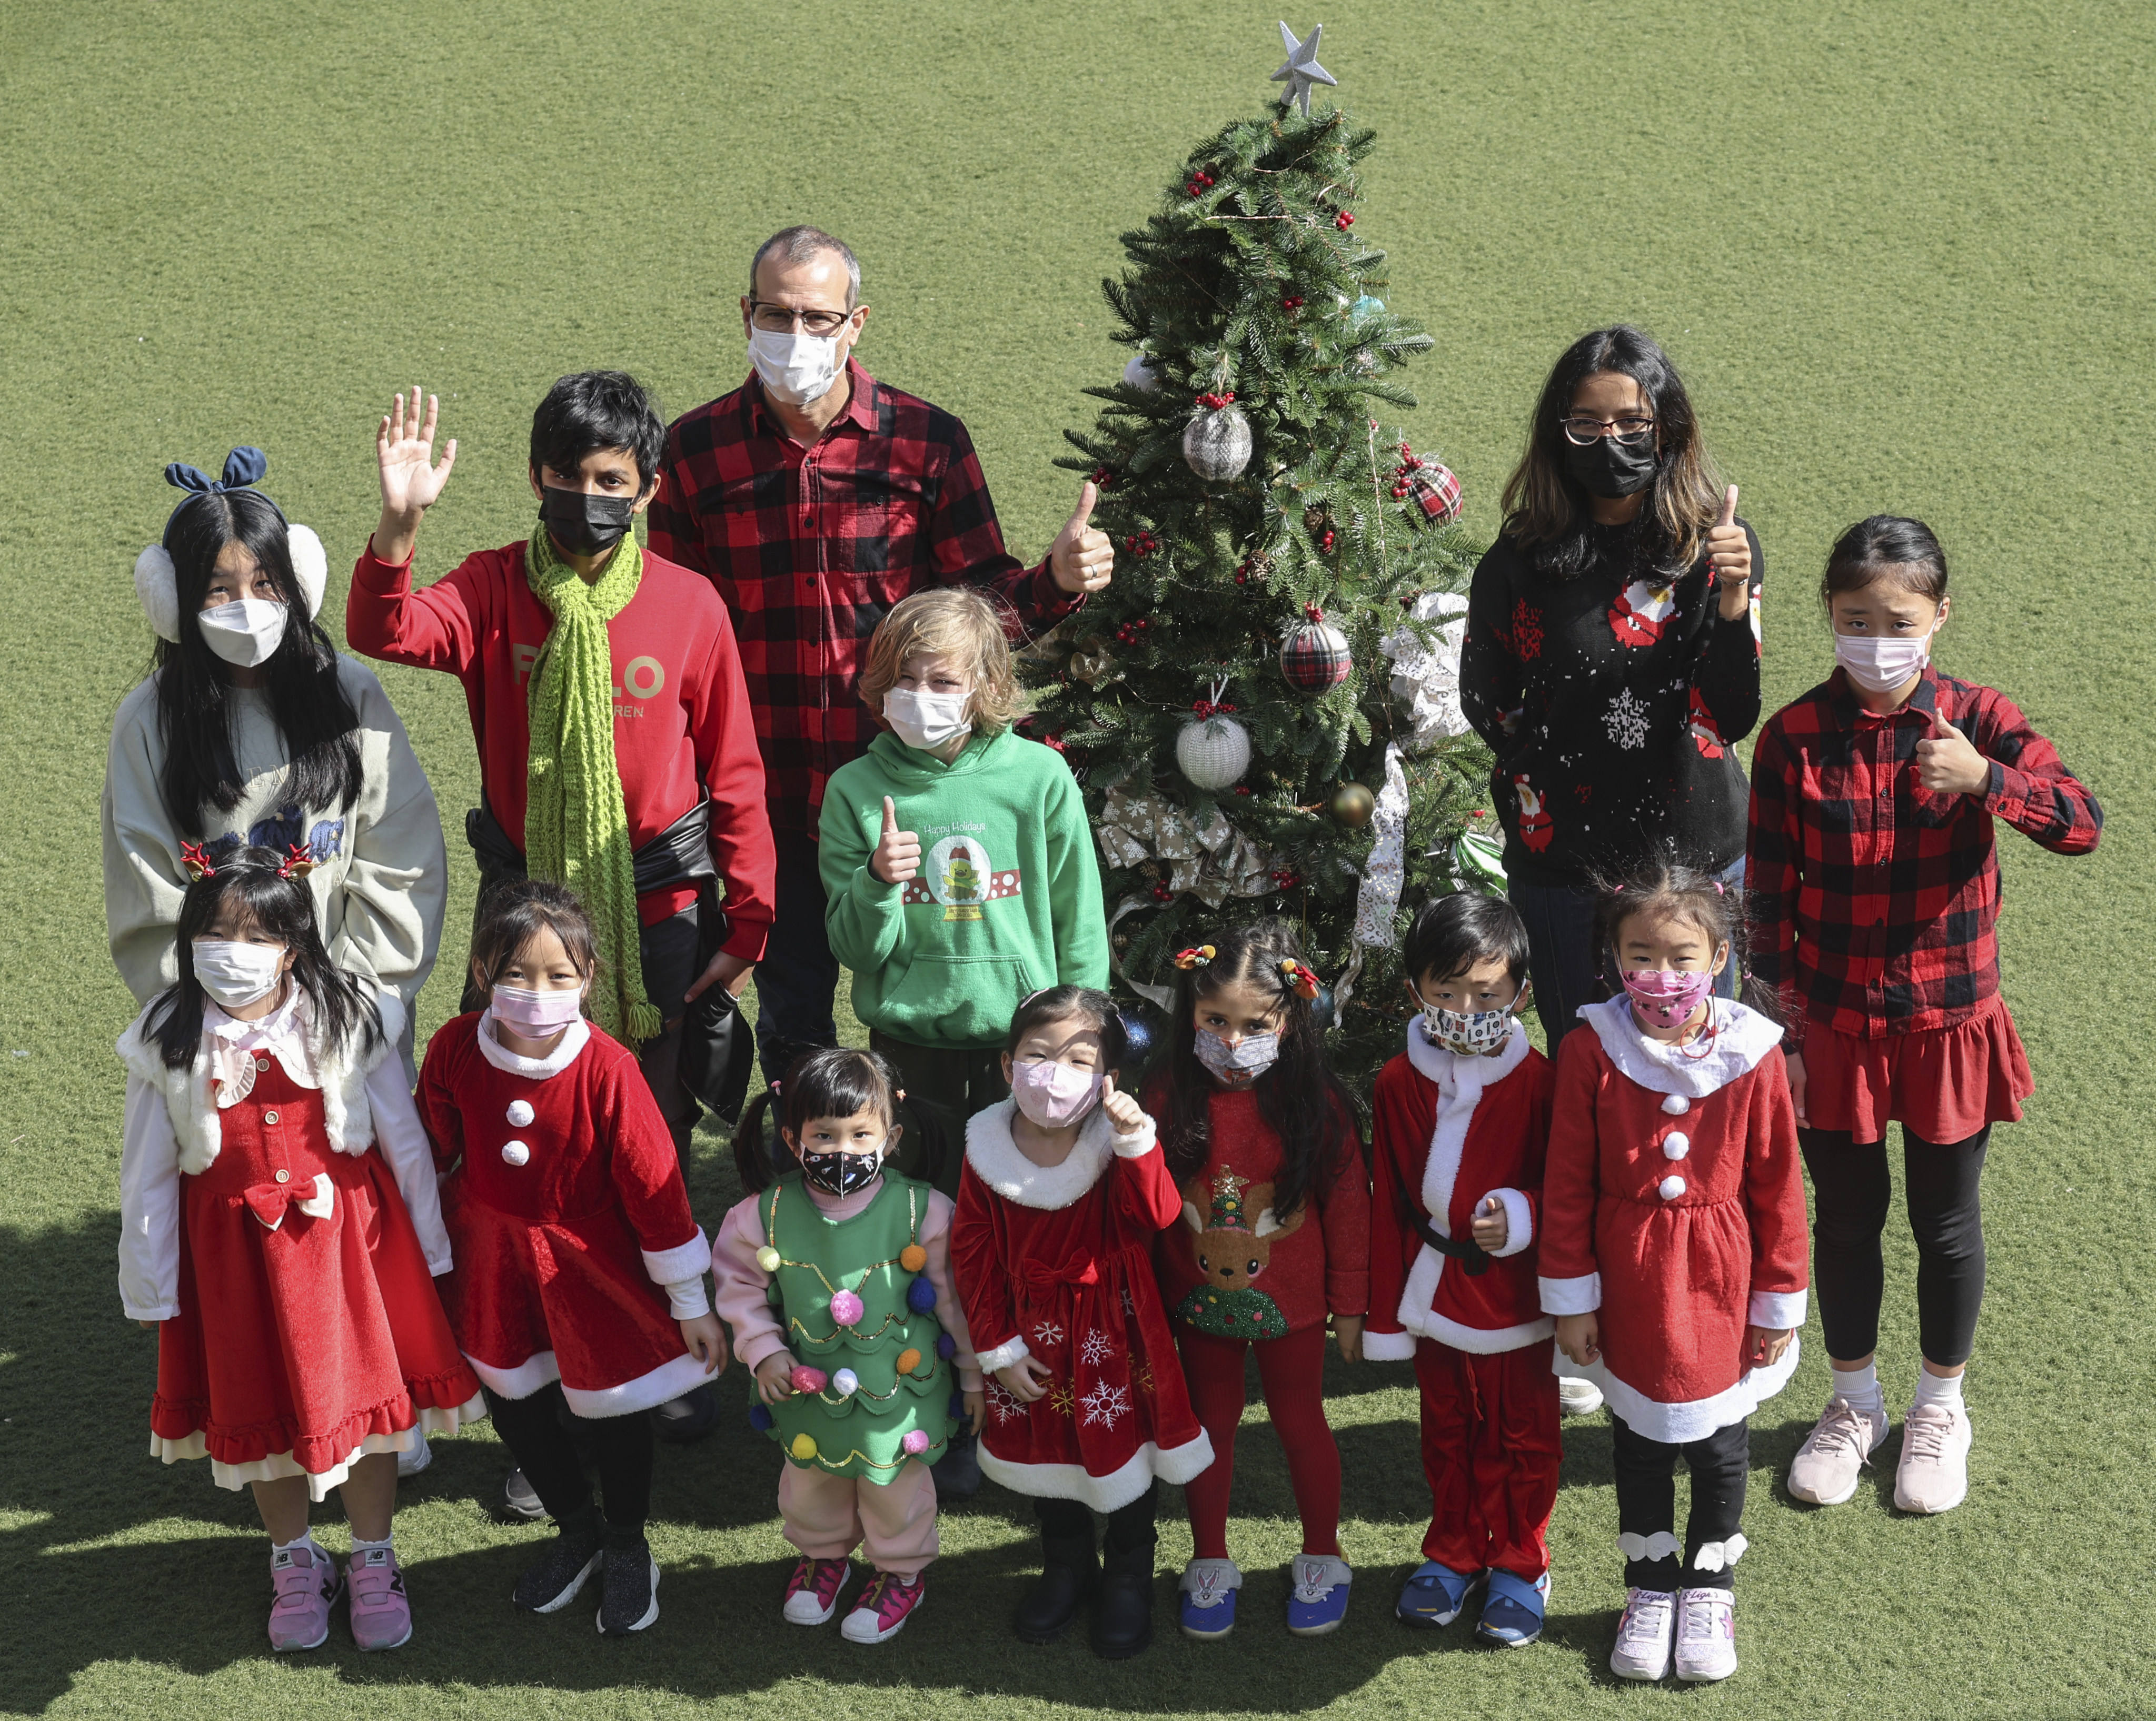 The international school in Kowloon Tong has been a longtime partner of Operation Santa Claus. Photo: Edmond So